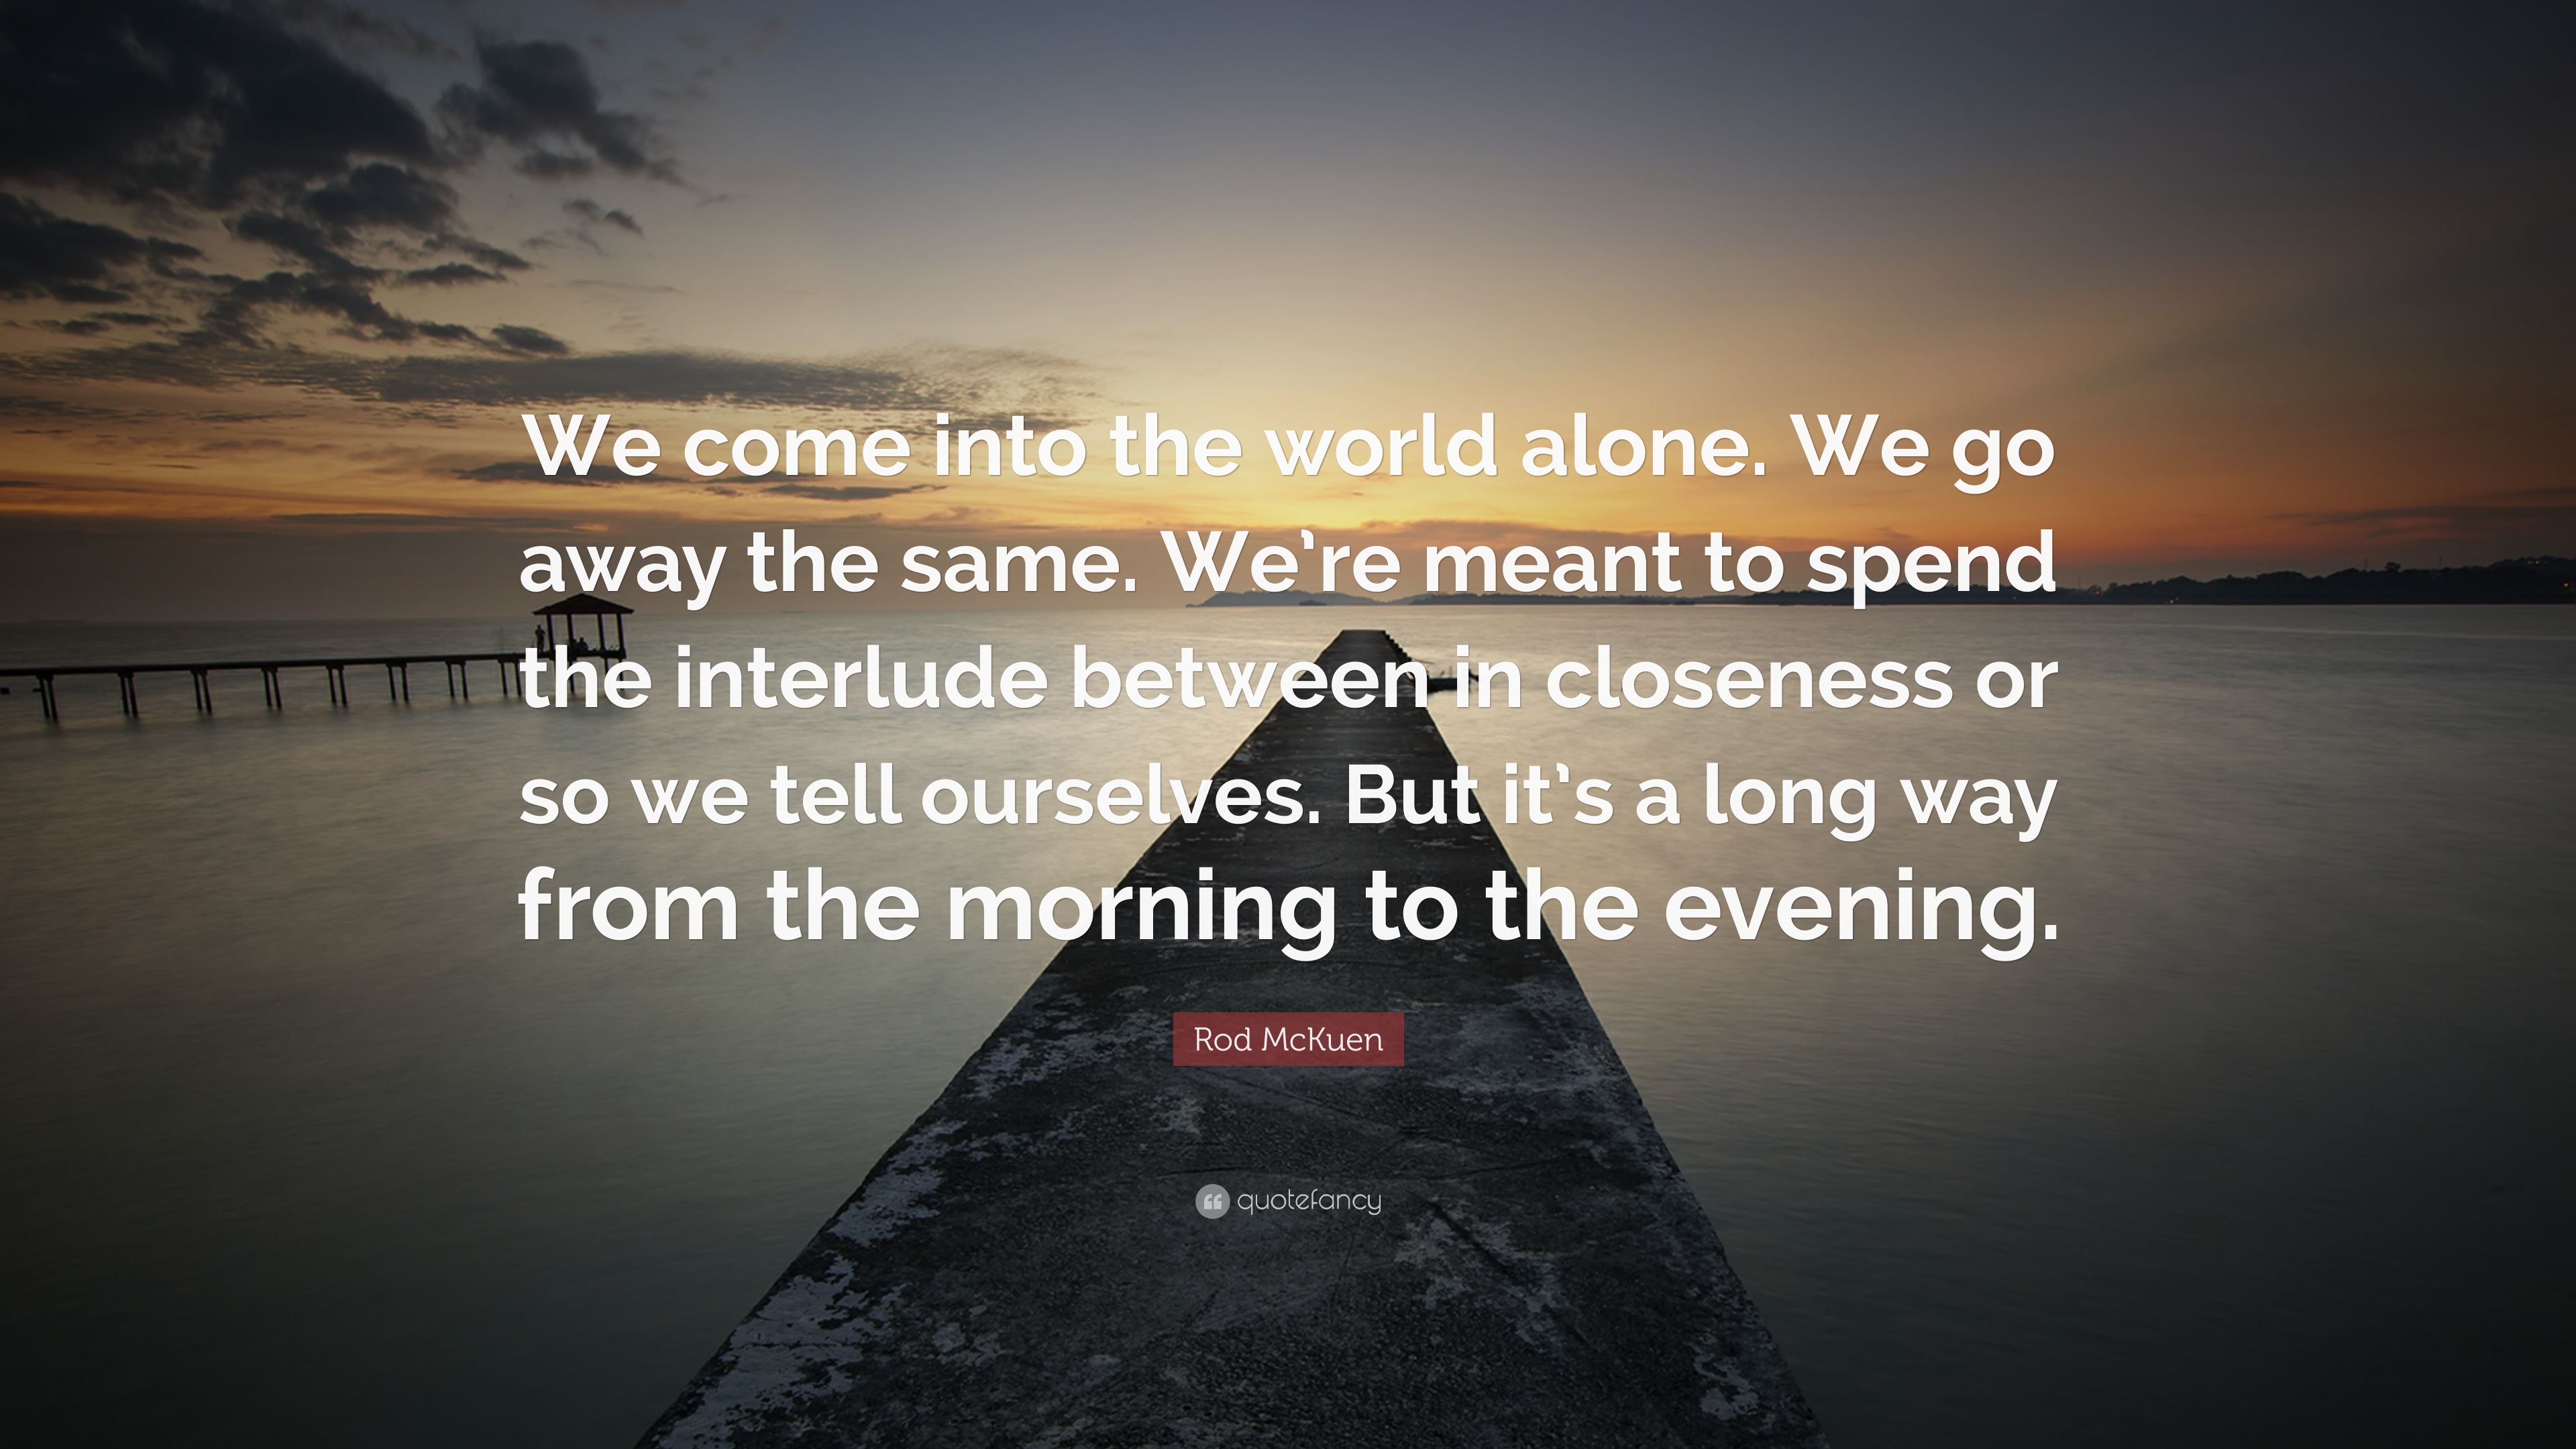 Rod McKuen Quote: “We come into the world alone. We go away the same ...